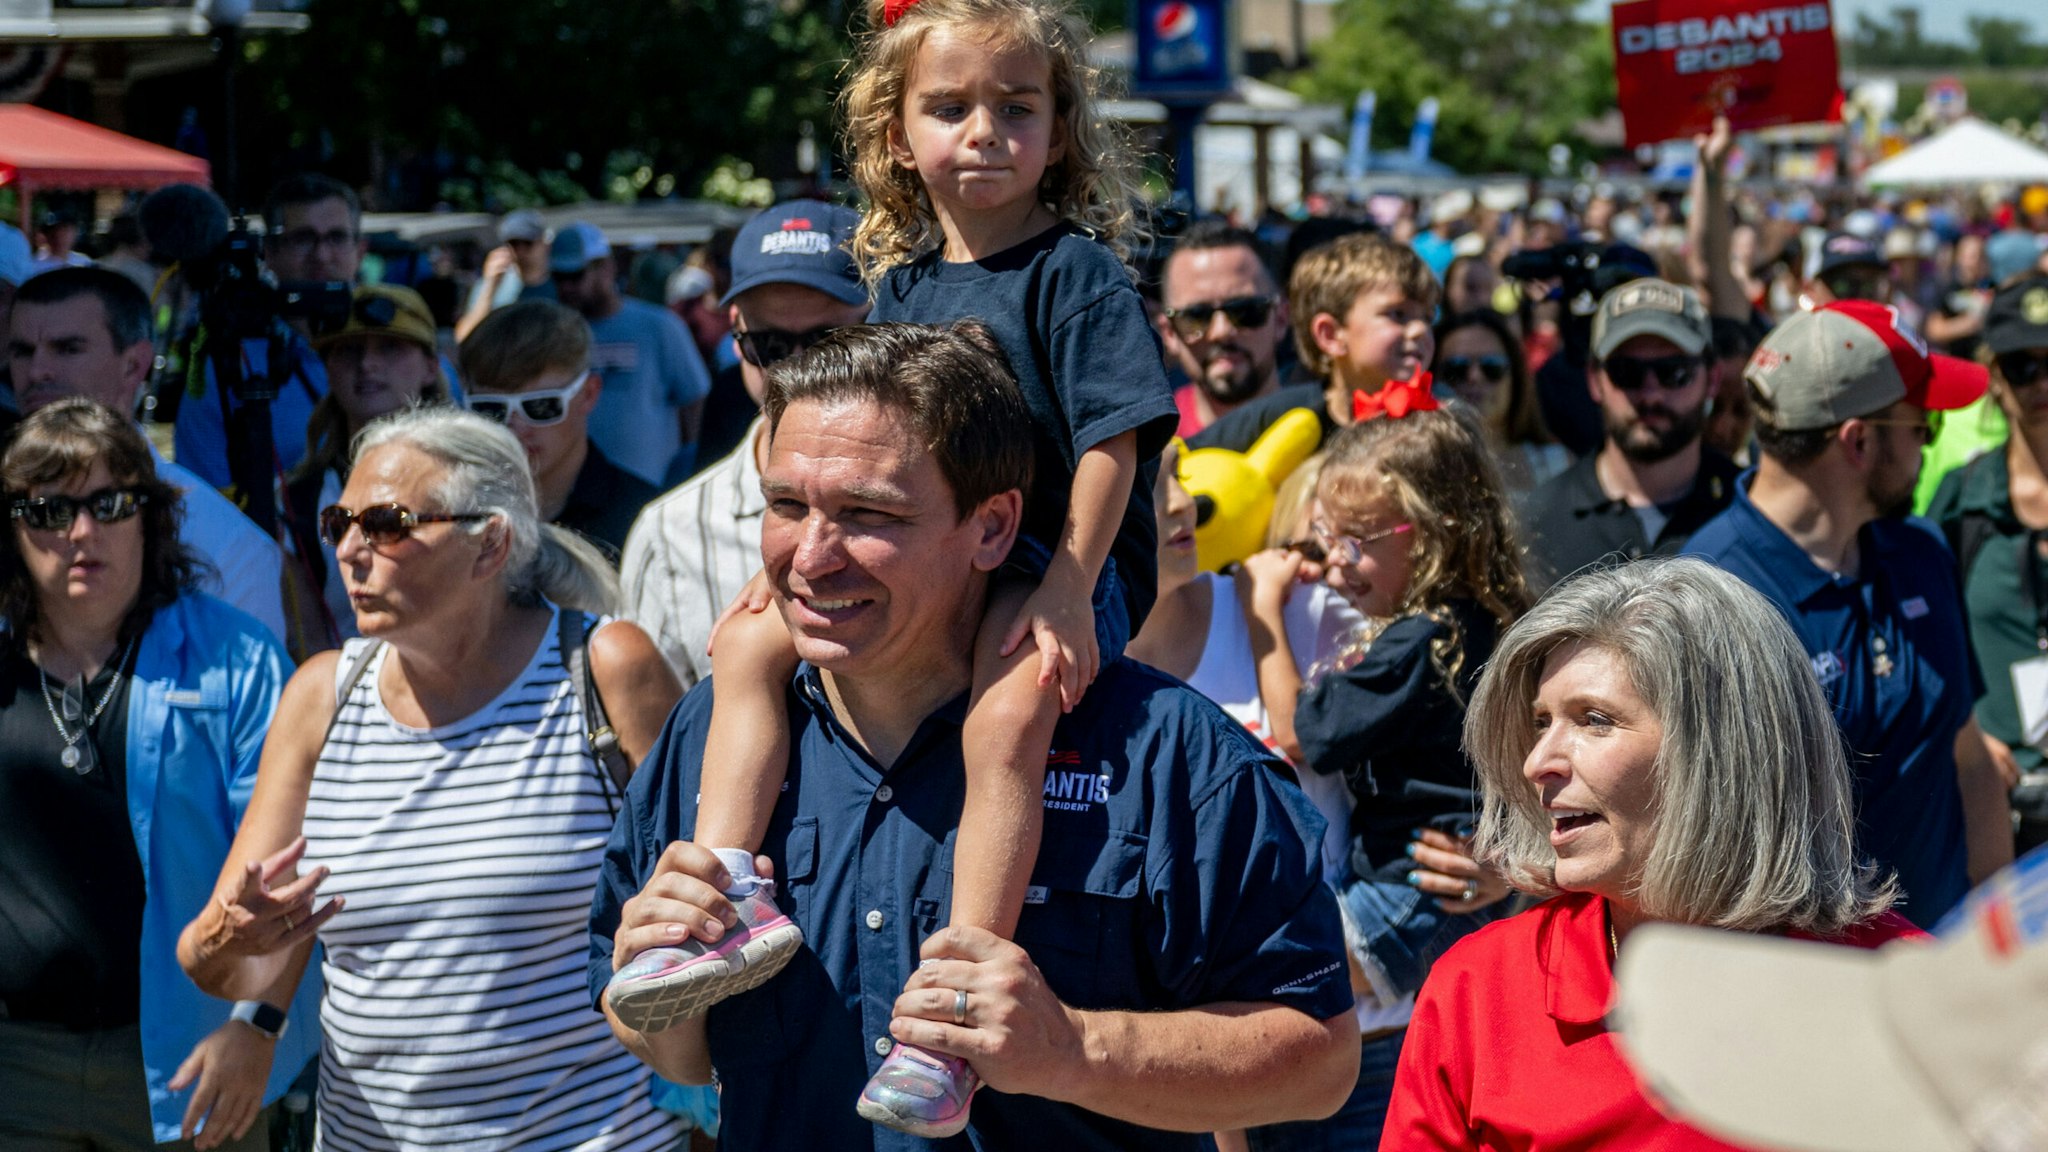 DES MOINES, IOWA - AUGUST 12: Republican presidential candidate Florida Gov. Ron DeSantis carries his daughter Madison while walking alongside Sen. Joni Ernst (R-IA) through the Iowa State Fair on August 12, 2023 in Des Moines, Iowa. Republican and Democratic presidential hopefuls, including Florida Gov. Ron DeSantis, former President Donald Trump are visiting the fair, a tradition in one of the first states to hold caucuses in 2024.